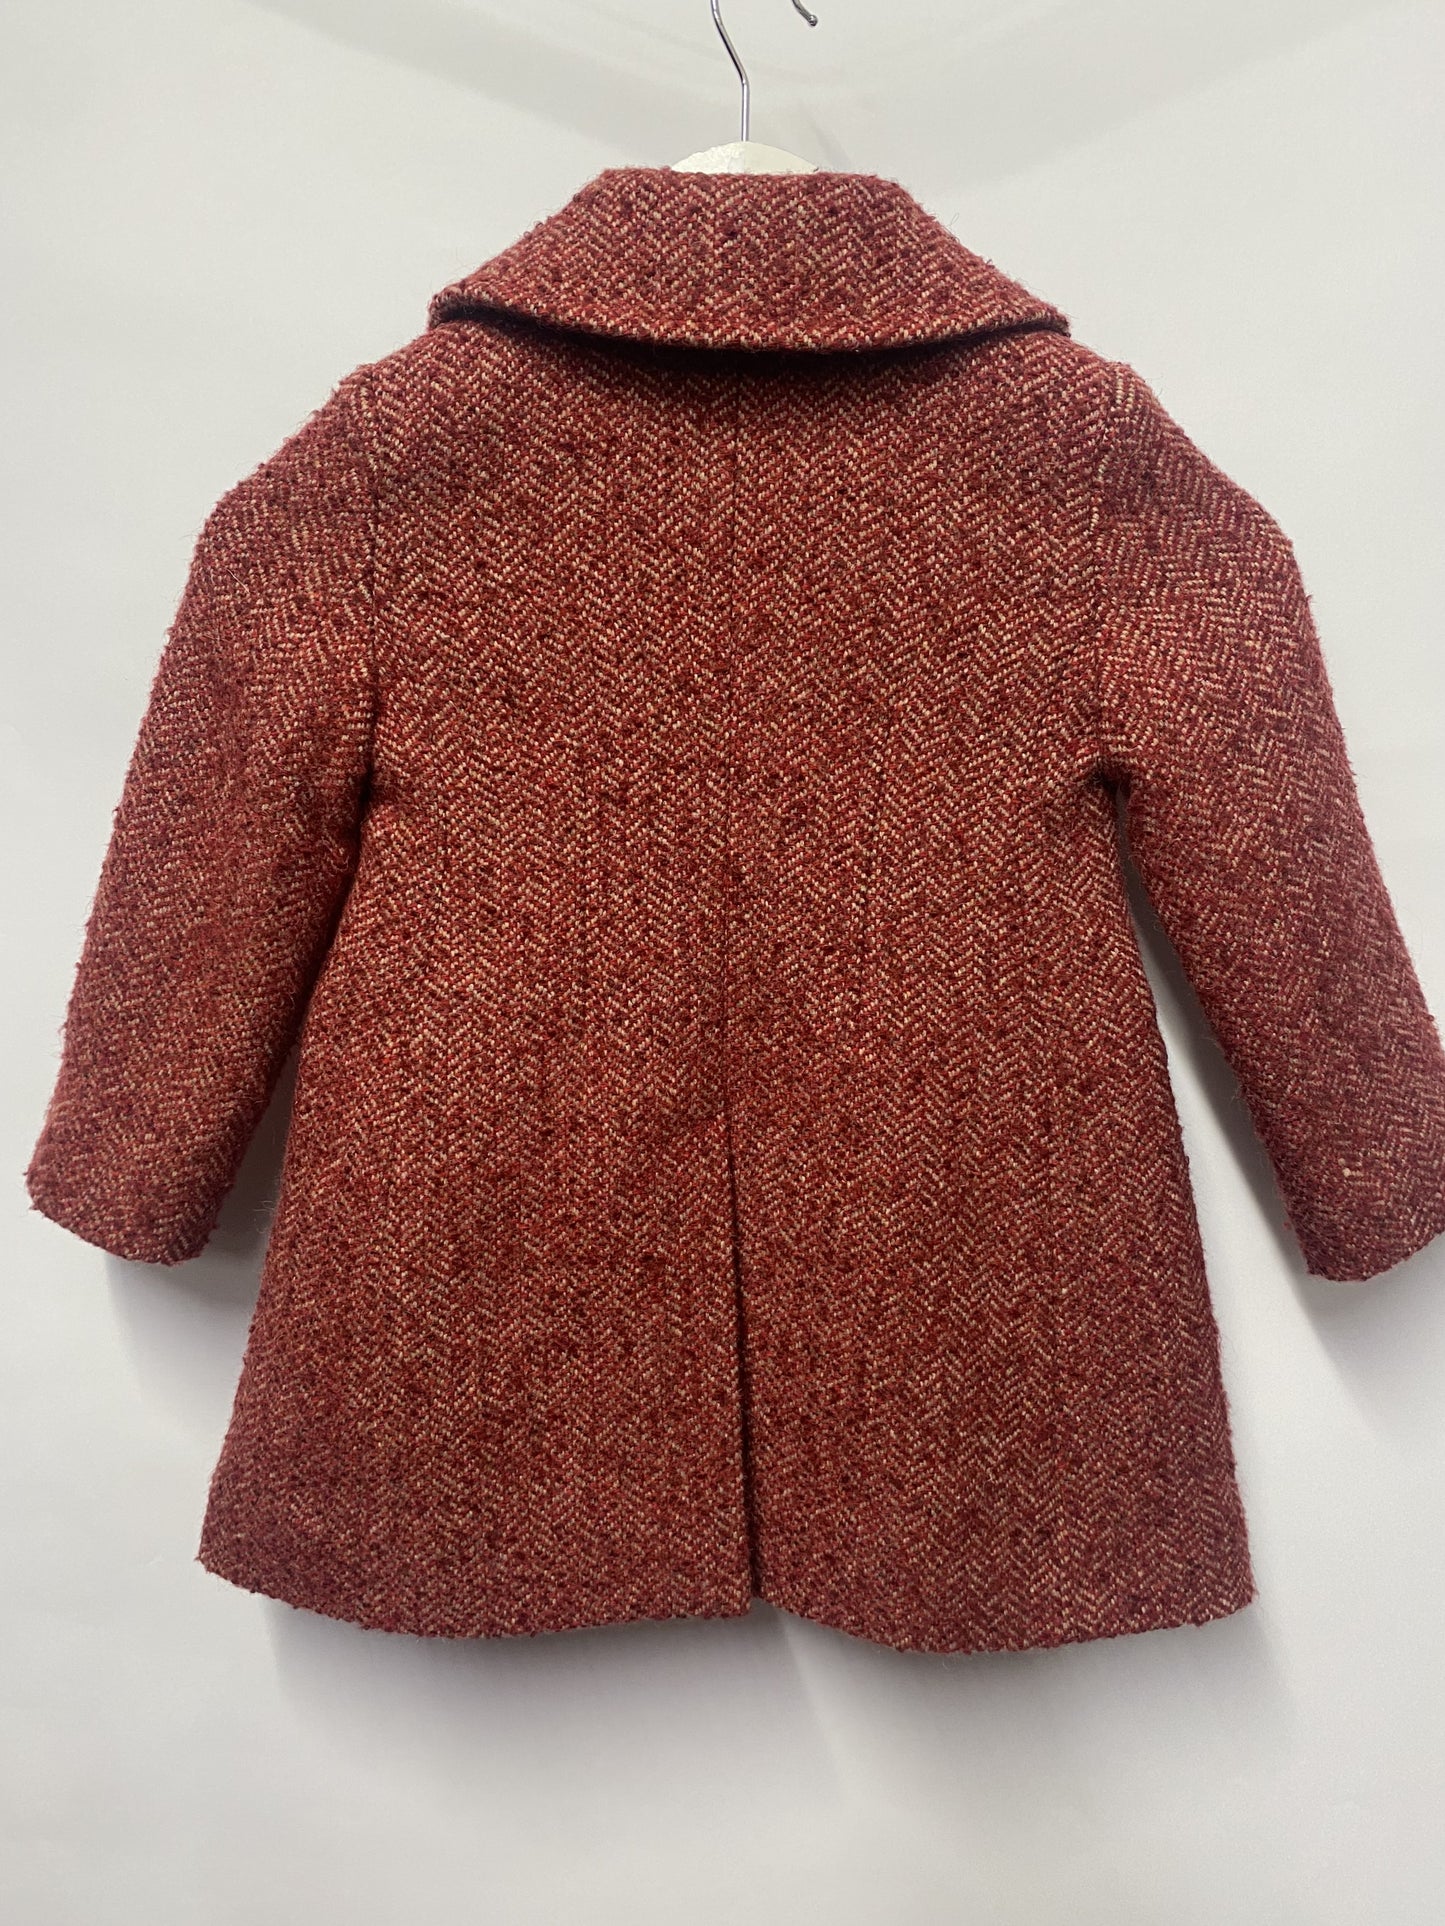 Dolce & Gabbana Red Tweed Wool Blend double Breasted Jacket 4 Yrs